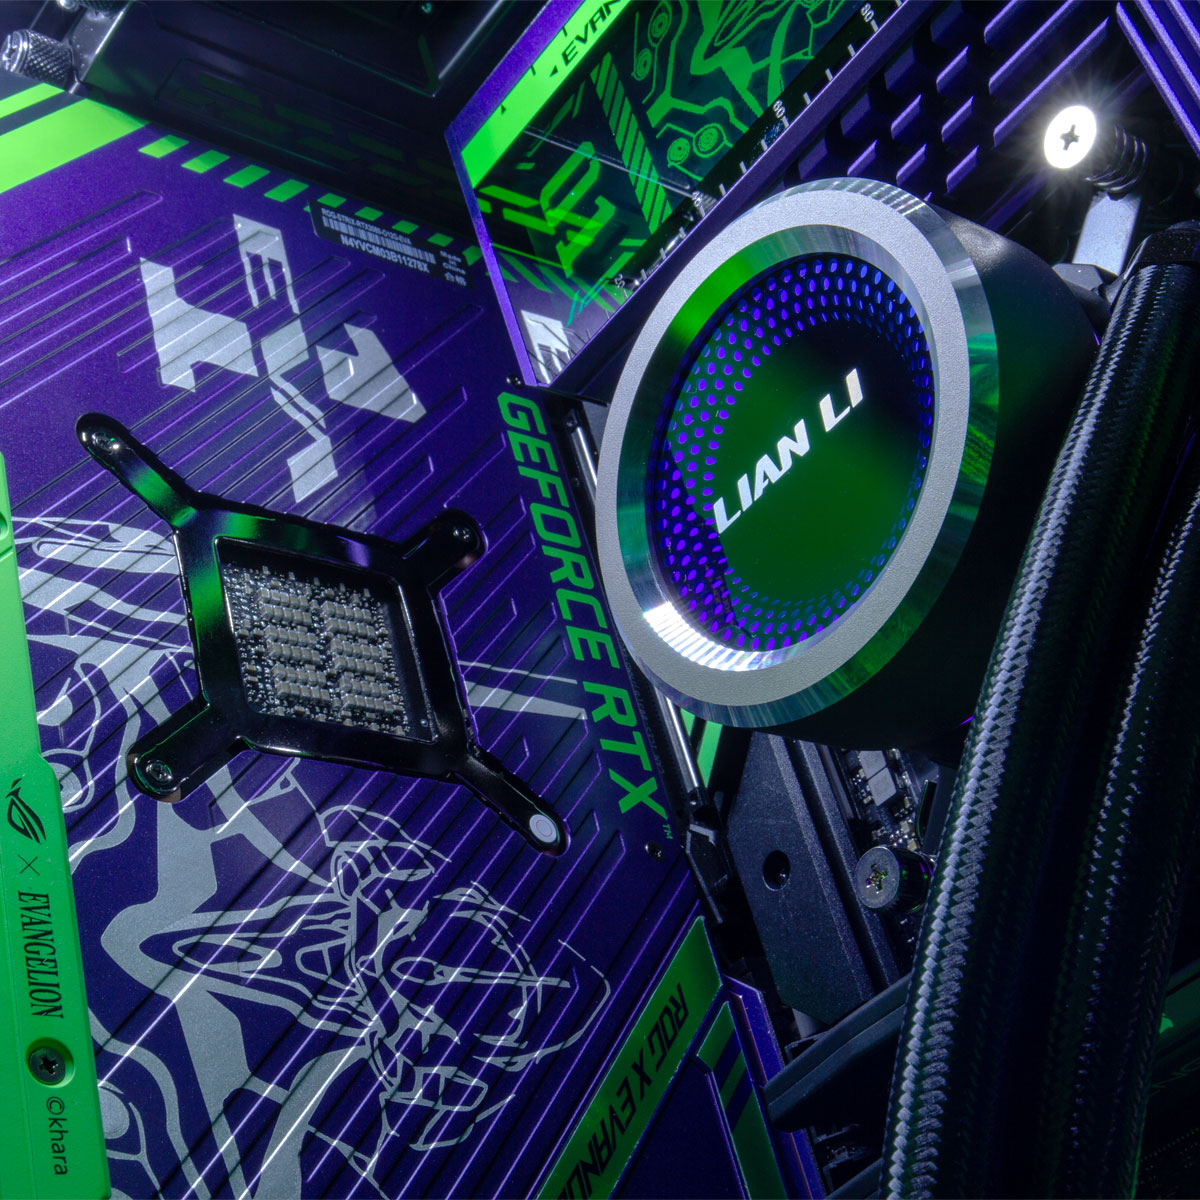 Overclockers UK - OcUK Gaming Genesis - Limited Edition Evangelion Inspired Powered By Asus Gaming PC